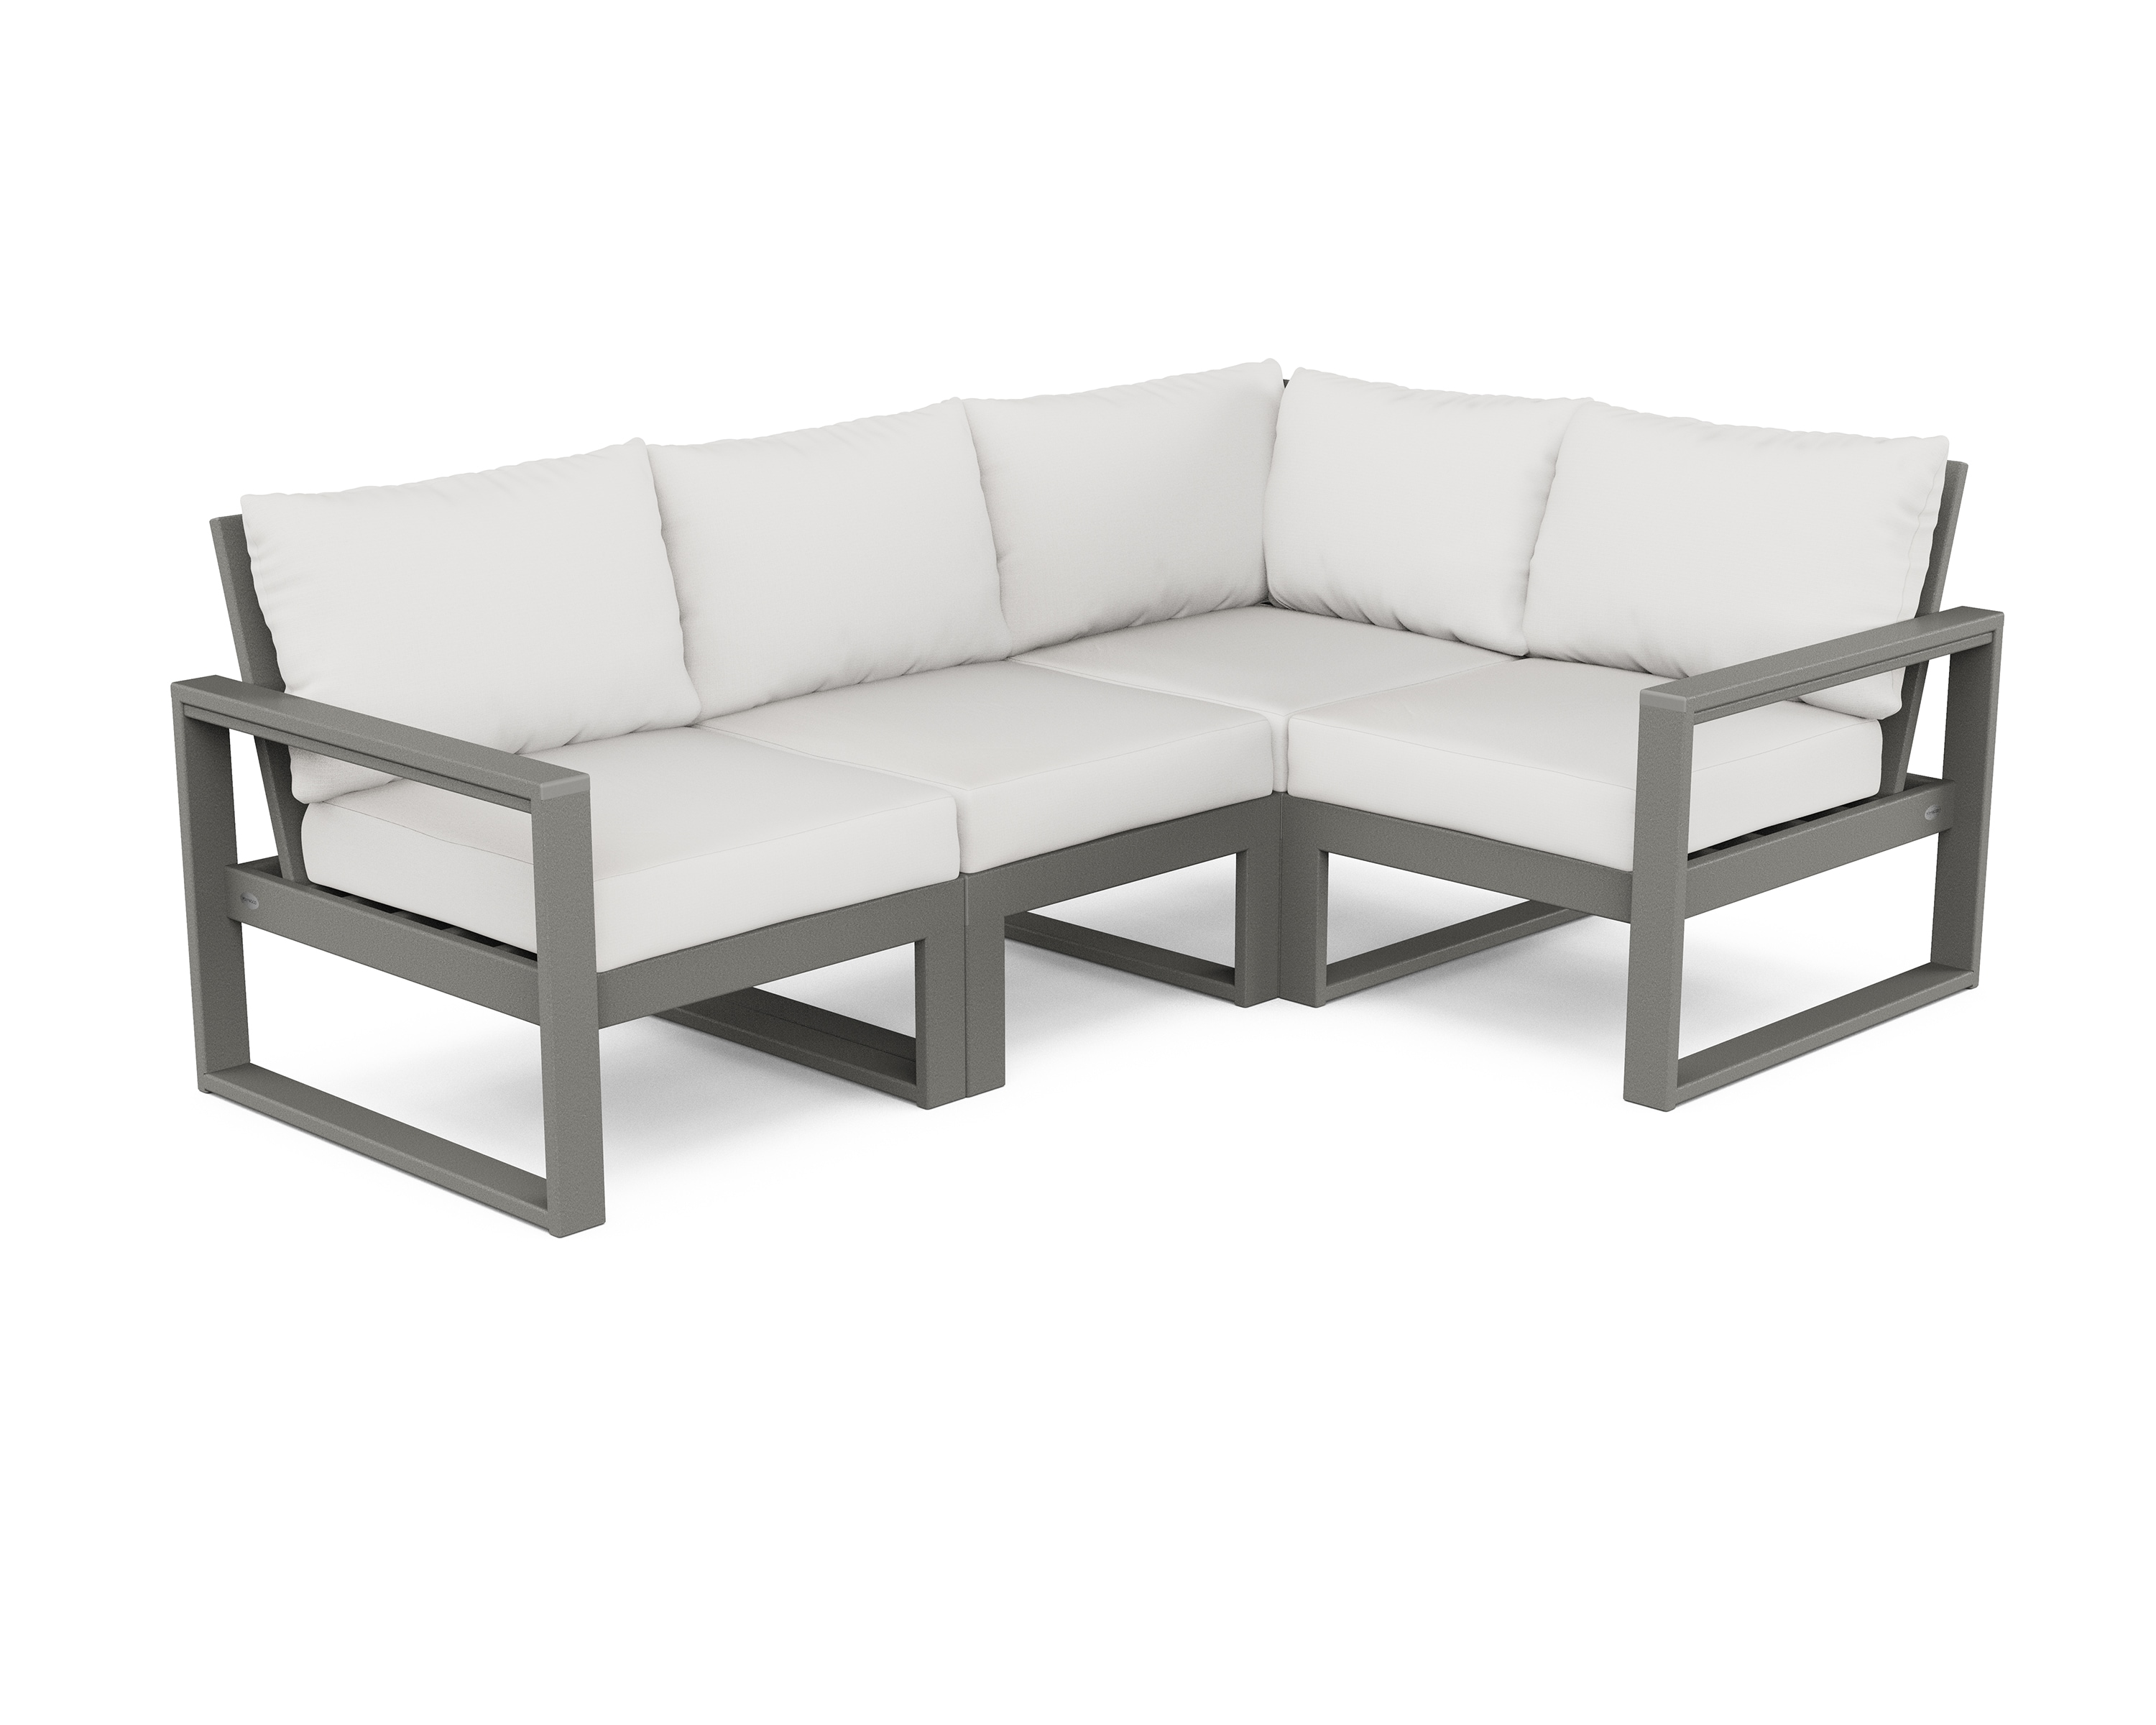 diep een experiment doen rijk POLYWOOD Edge 4-Piece Patio Conversation Set with White Revolution Cushions  in the Patio Conversation Sets department at Lowes.com